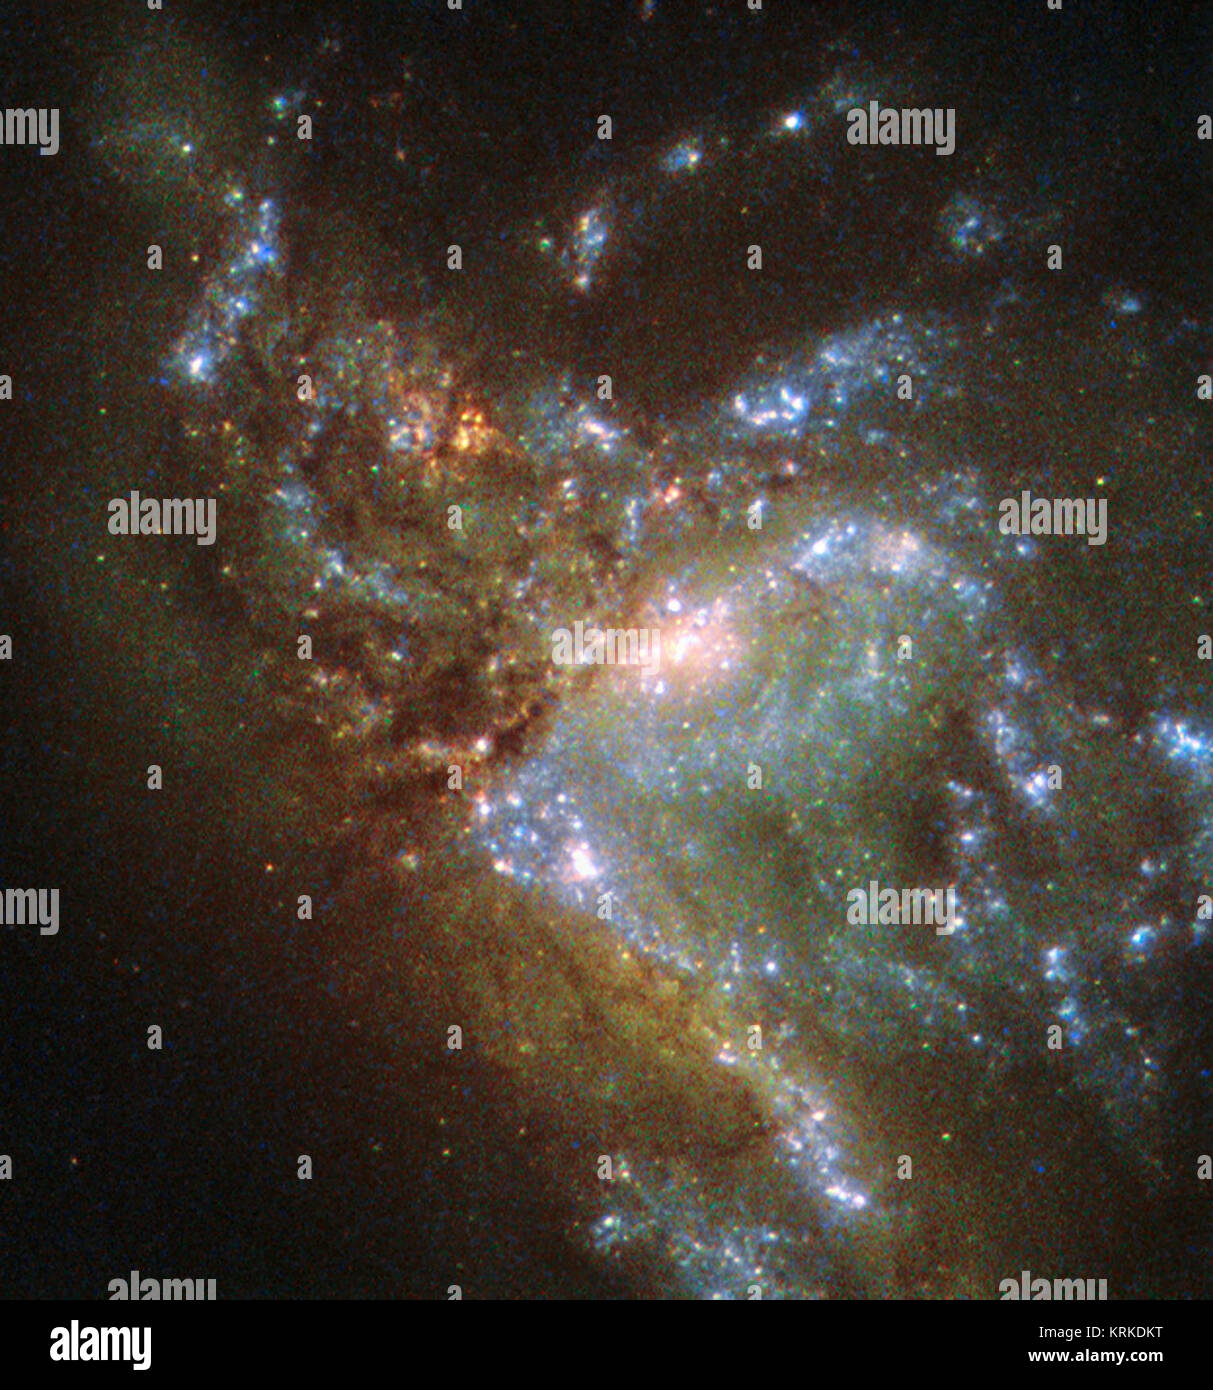 This image, taken with the Wide Field Planetary Camera 2 on board the NASA/ESA Hubble Space Telescope, shows the galaxy NGC 6052, located around 230 million light-years away in the constellation of Hercules. It would be reasonable to think of this as a single abnormal galaxy, and it was originally classified as such. However, it is in fact a “new” galaxy in the process of forming. Two separate galaxies have been gradually drawn together, attracted by gravity, and have collided. We now see them merging into a single structure. As the merging process continues, individual stars are thrown out of Stock Photo